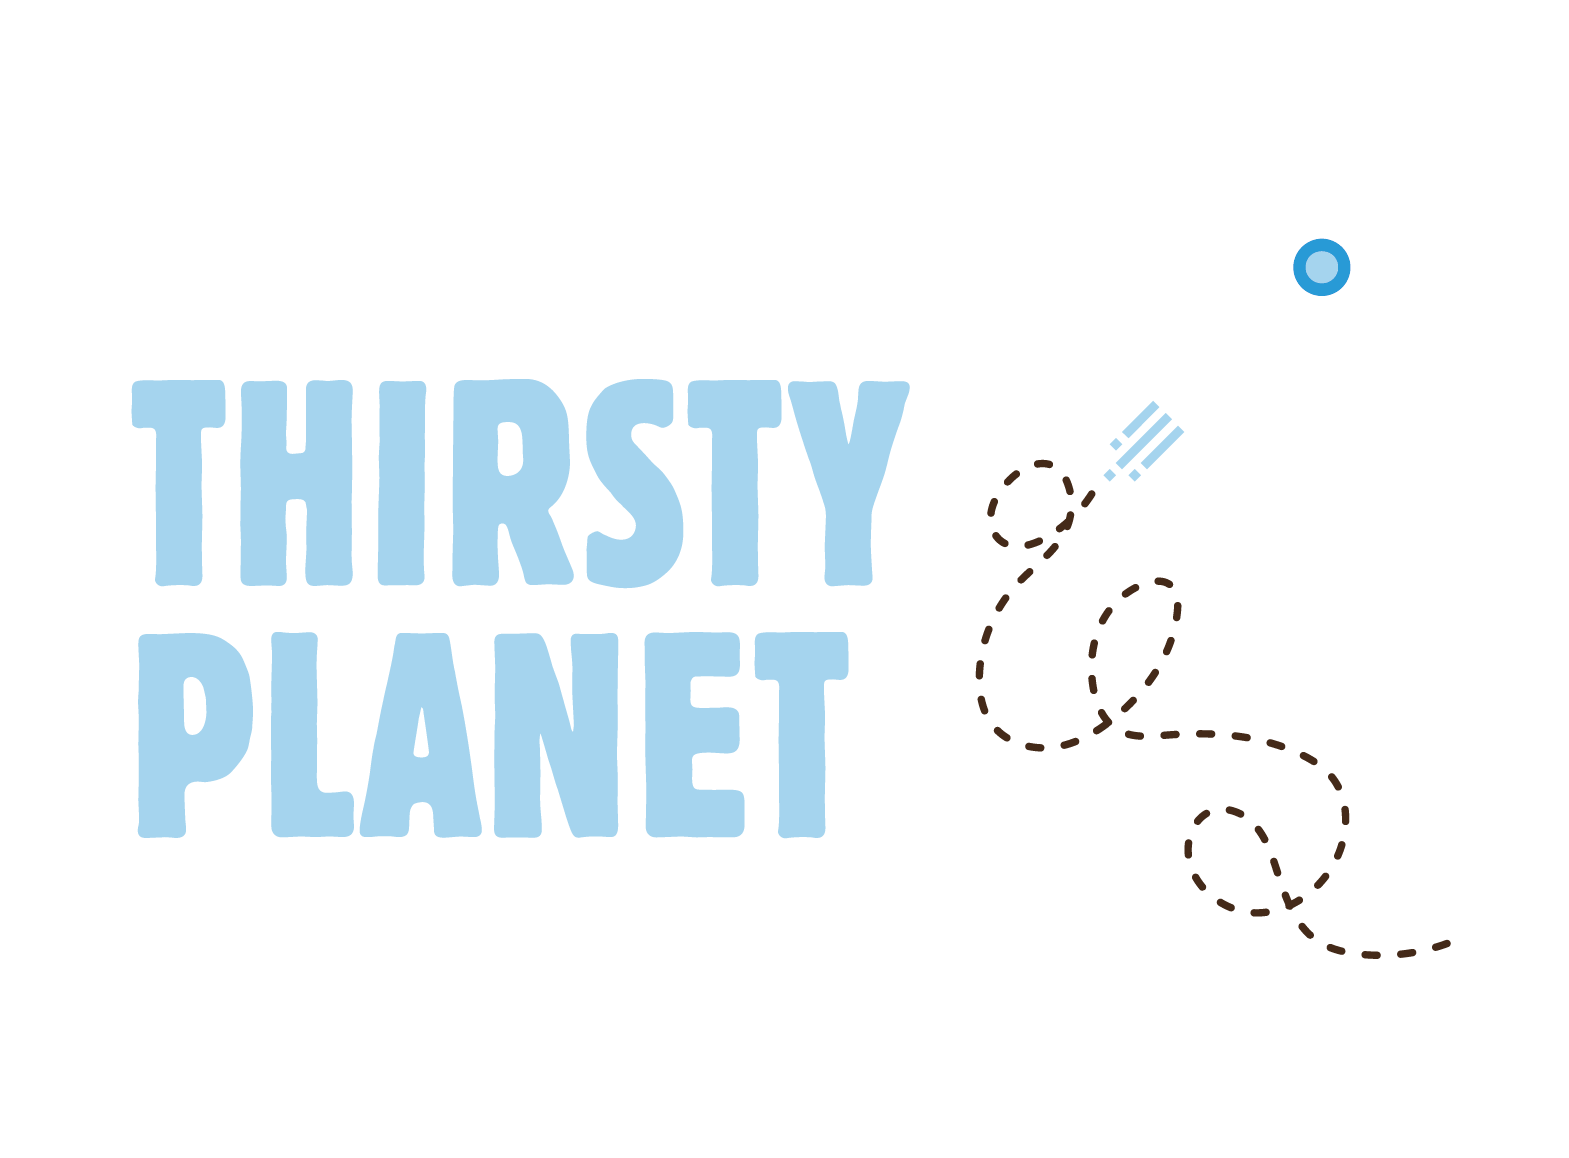 2007 Thirsty Planet was launched